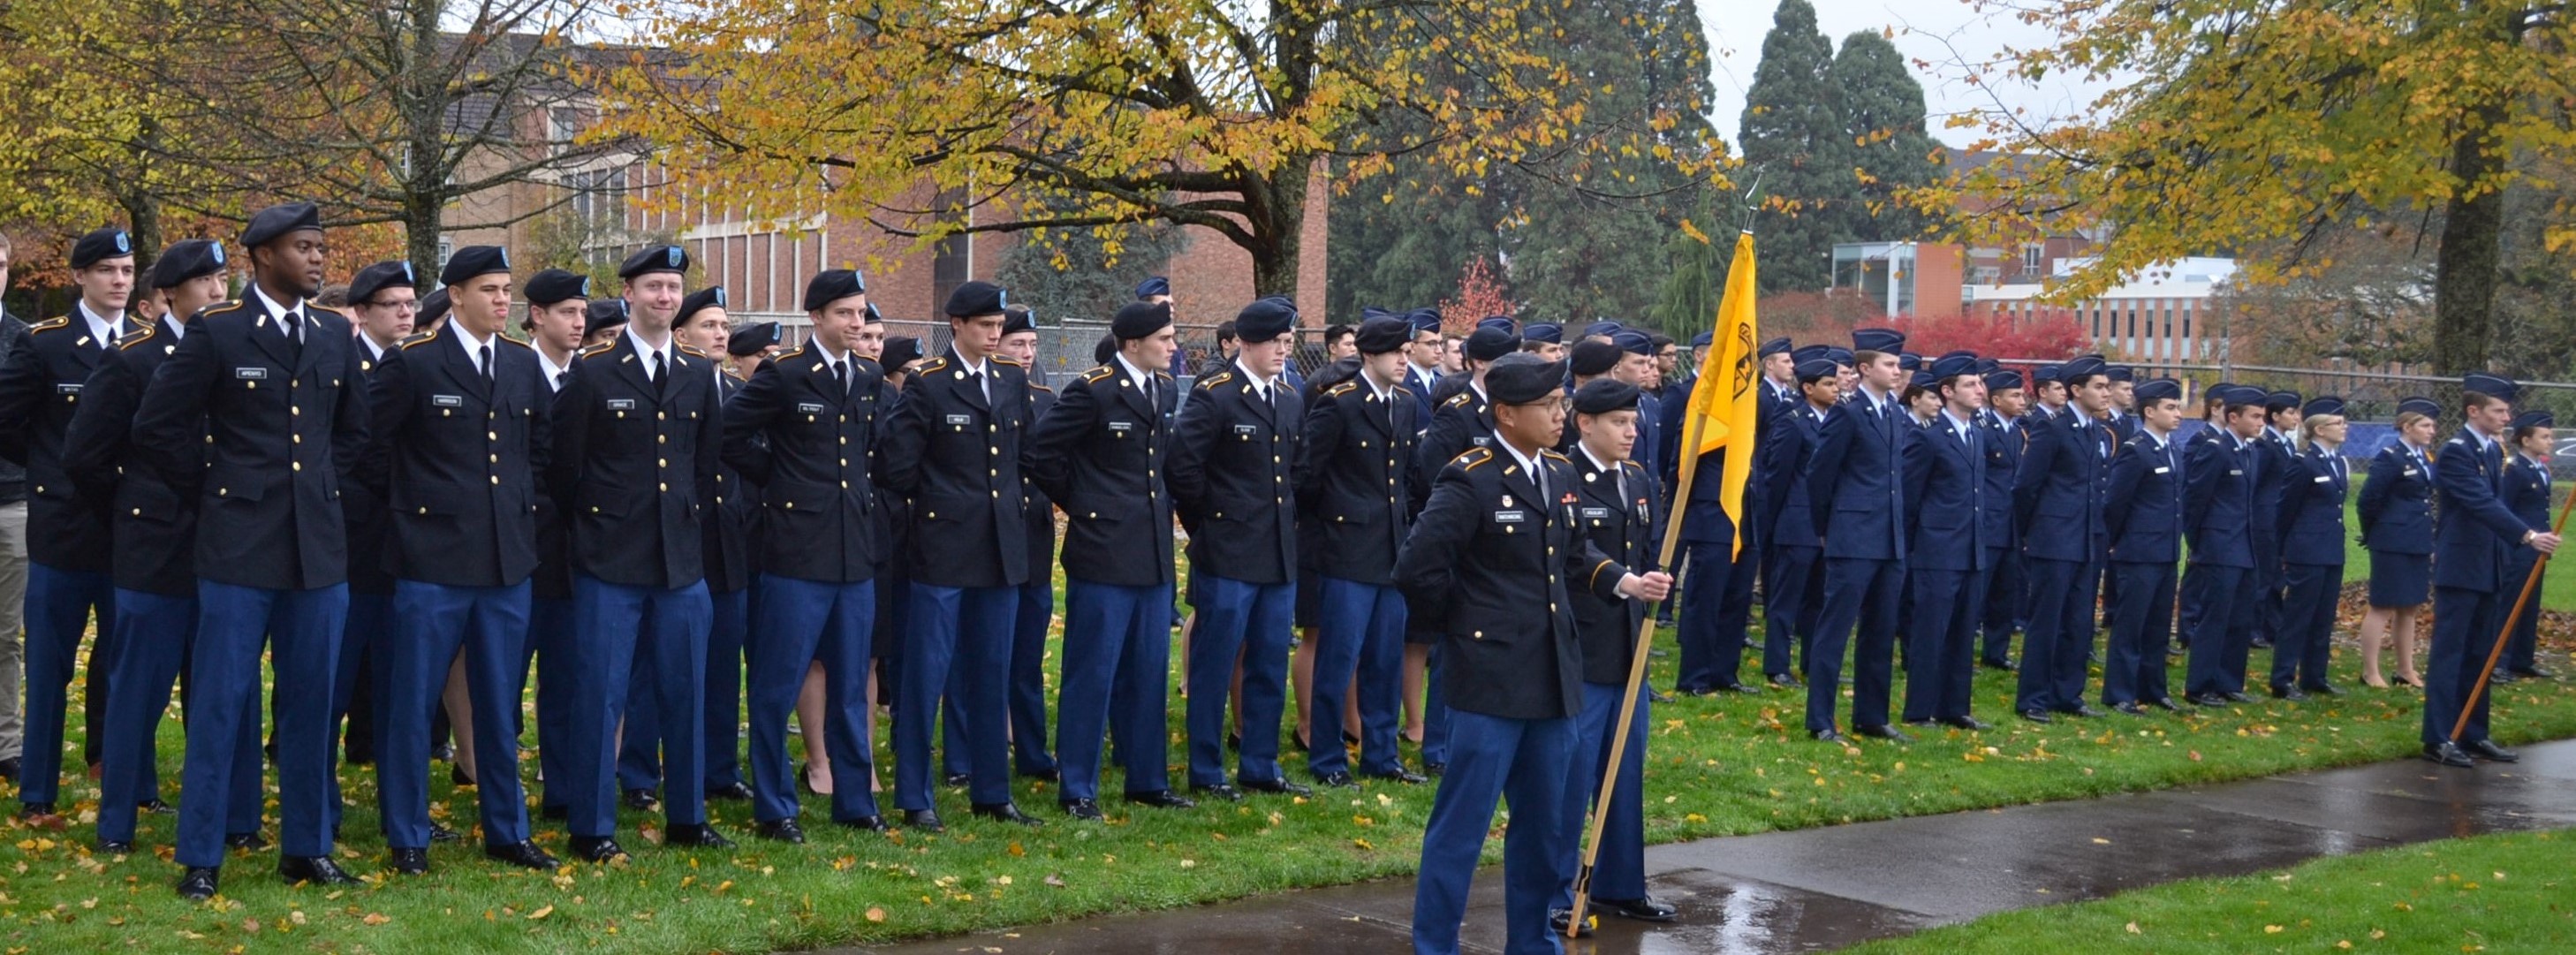 Army ROTC cadets lined up for Veterans Day 2017.